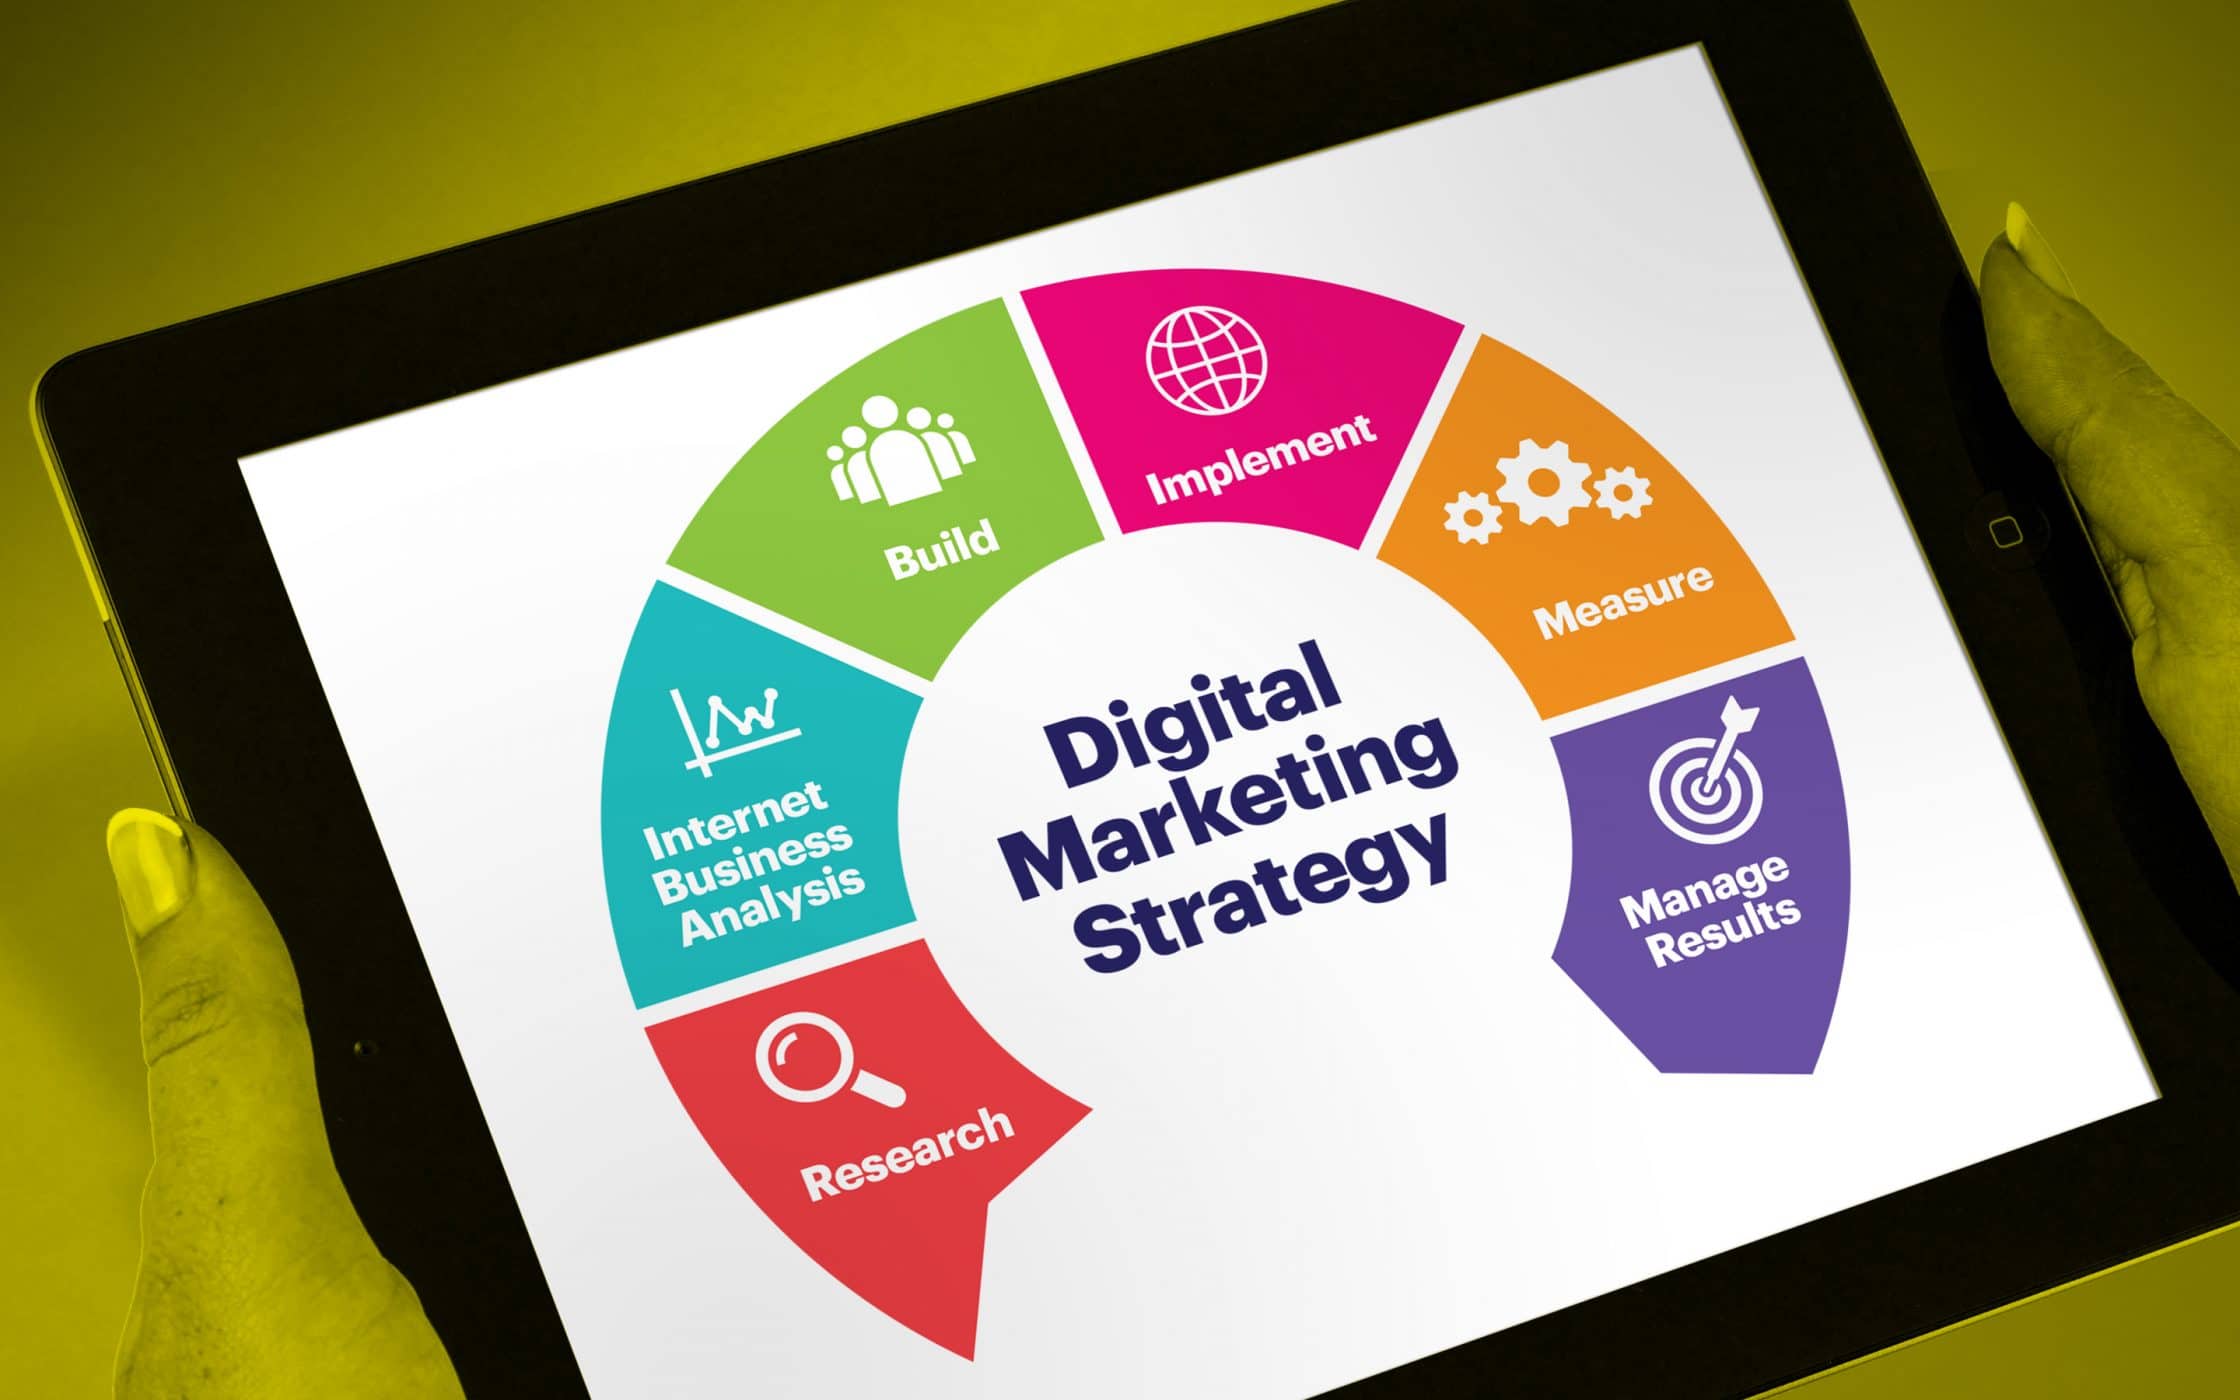 TIPS TO CREATE A GREAT DIGITAL MARKETING CAMPAIGN